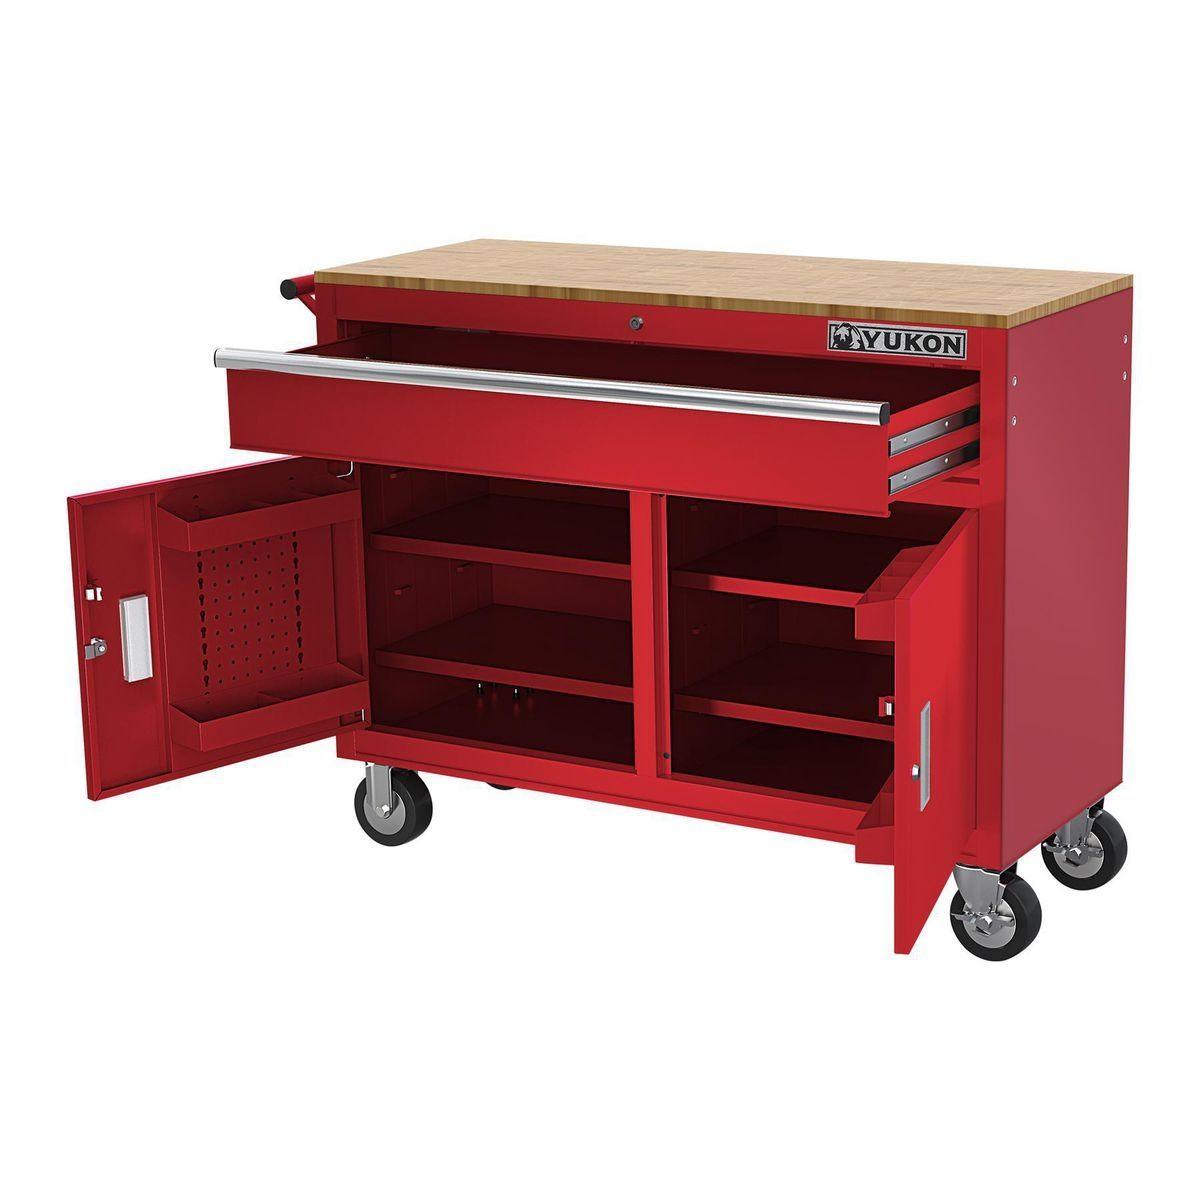 YUKON 46 in. Mobile Workbench with Solid Wood Top, Red